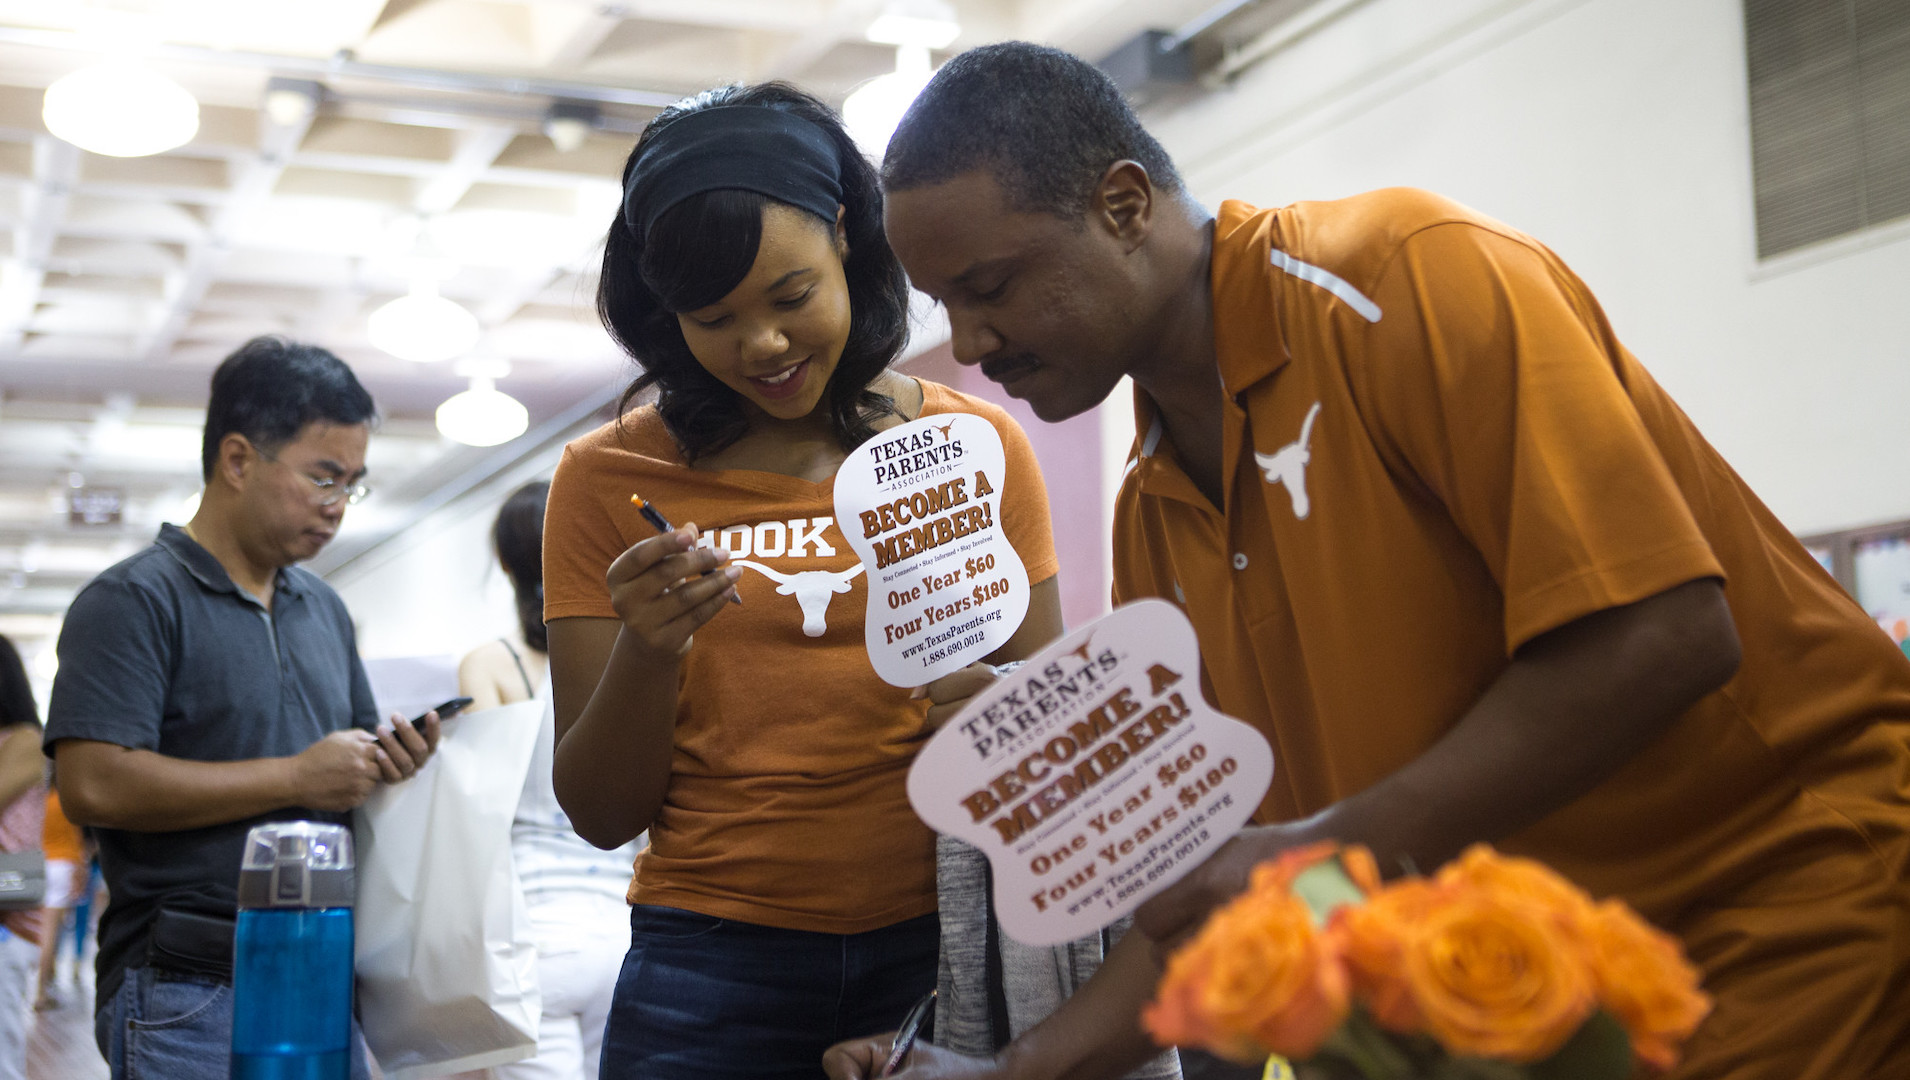 Family members in burnt orange shirts with Longhorns examine things at a table with signs that encourage people to become a member of Texas Parents